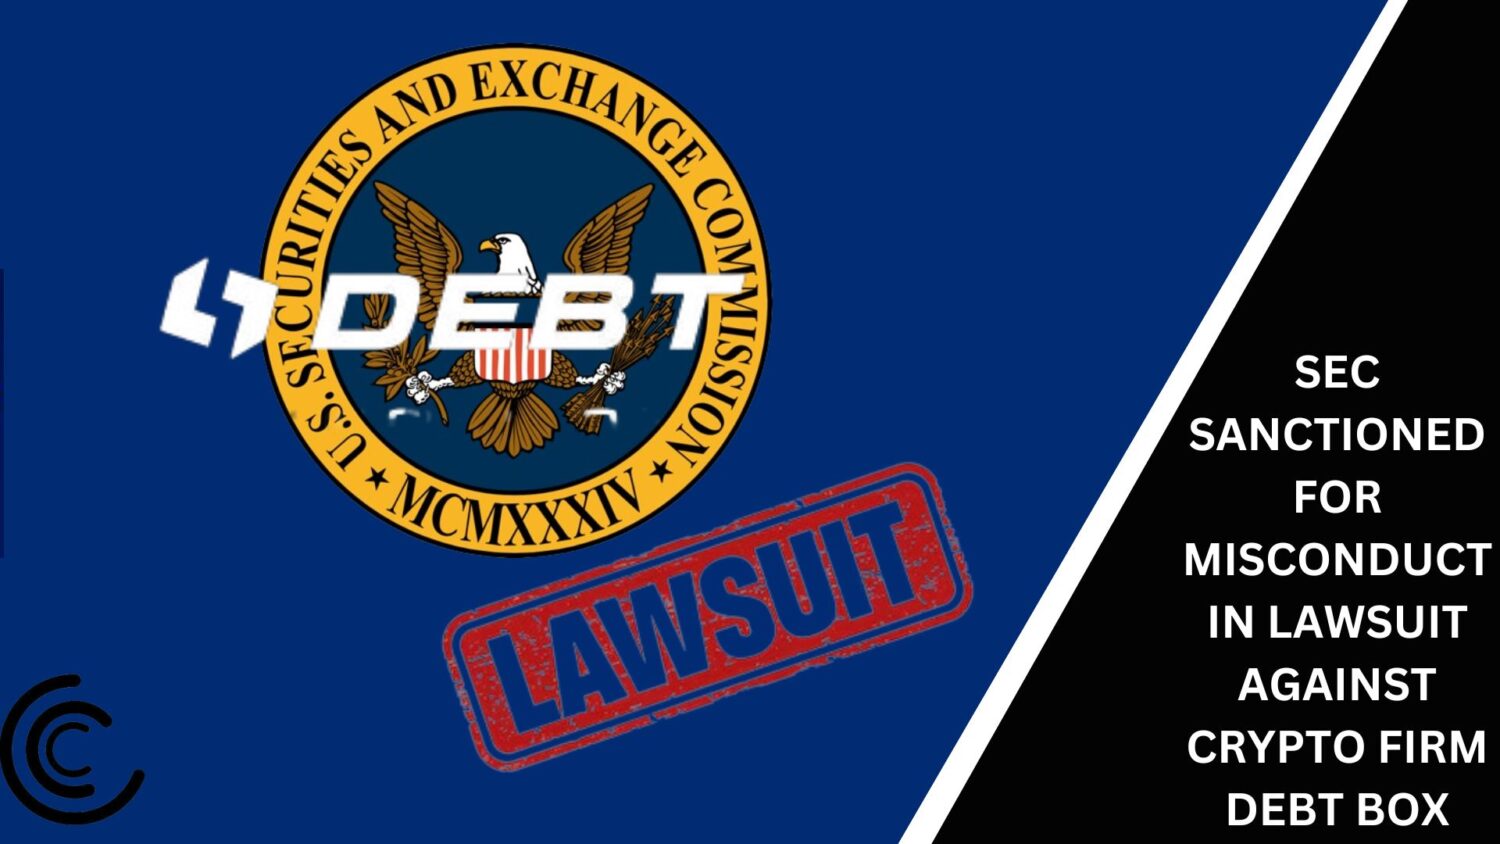 Sec Sanctioned For Misconduct In Lawsuit Against Crypto Firm Debt Box